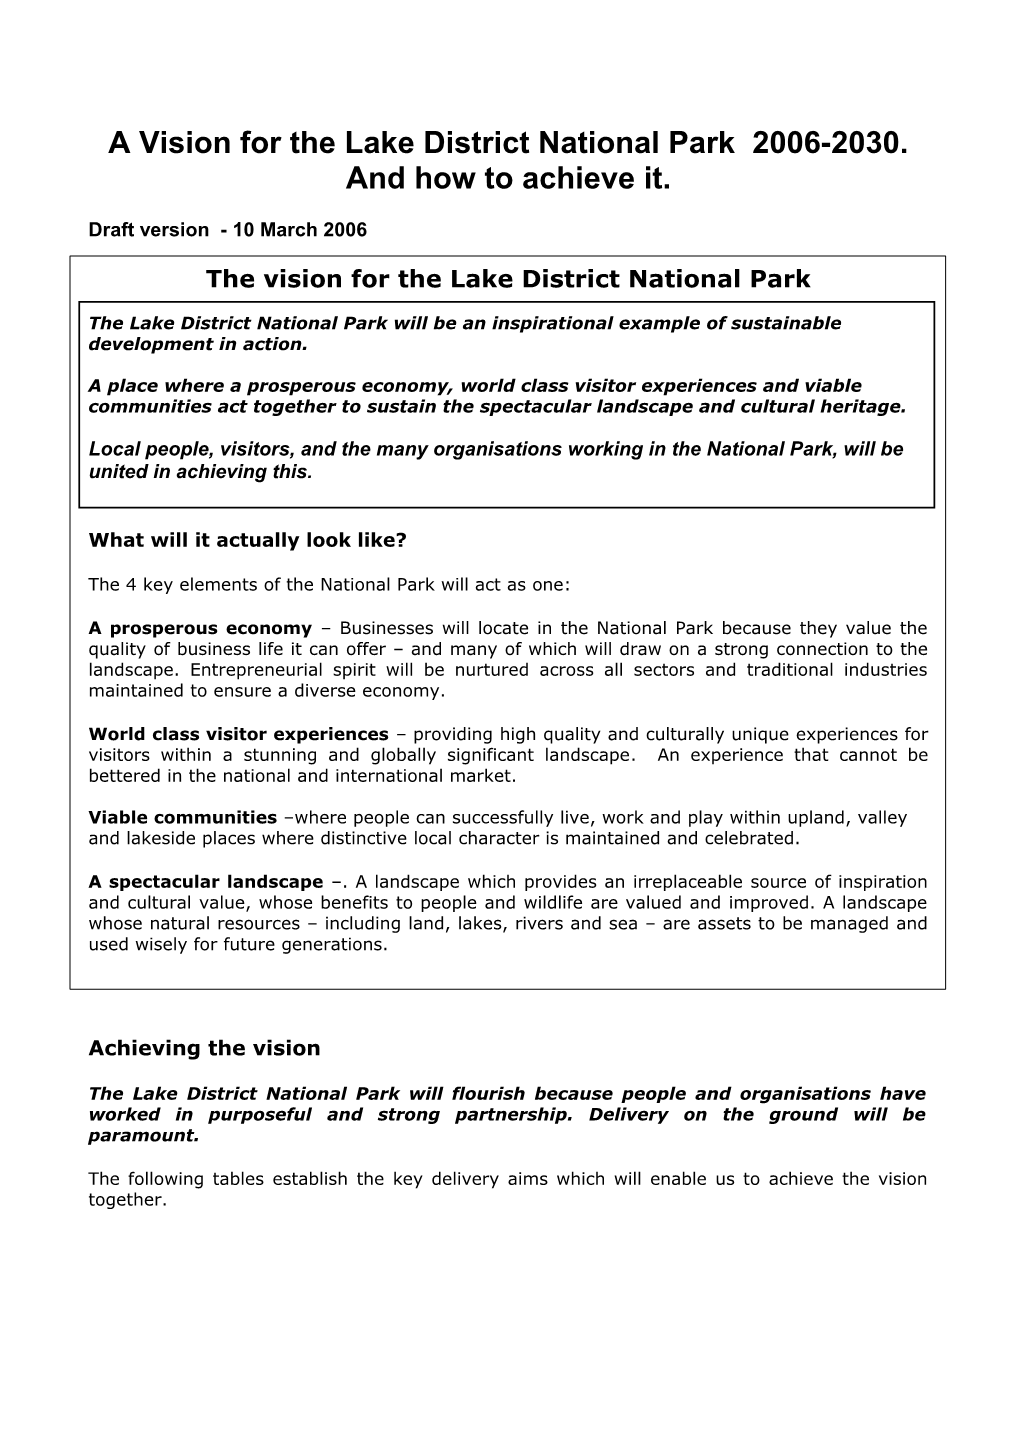 A Vision for the Lake District National Park 2006-2030